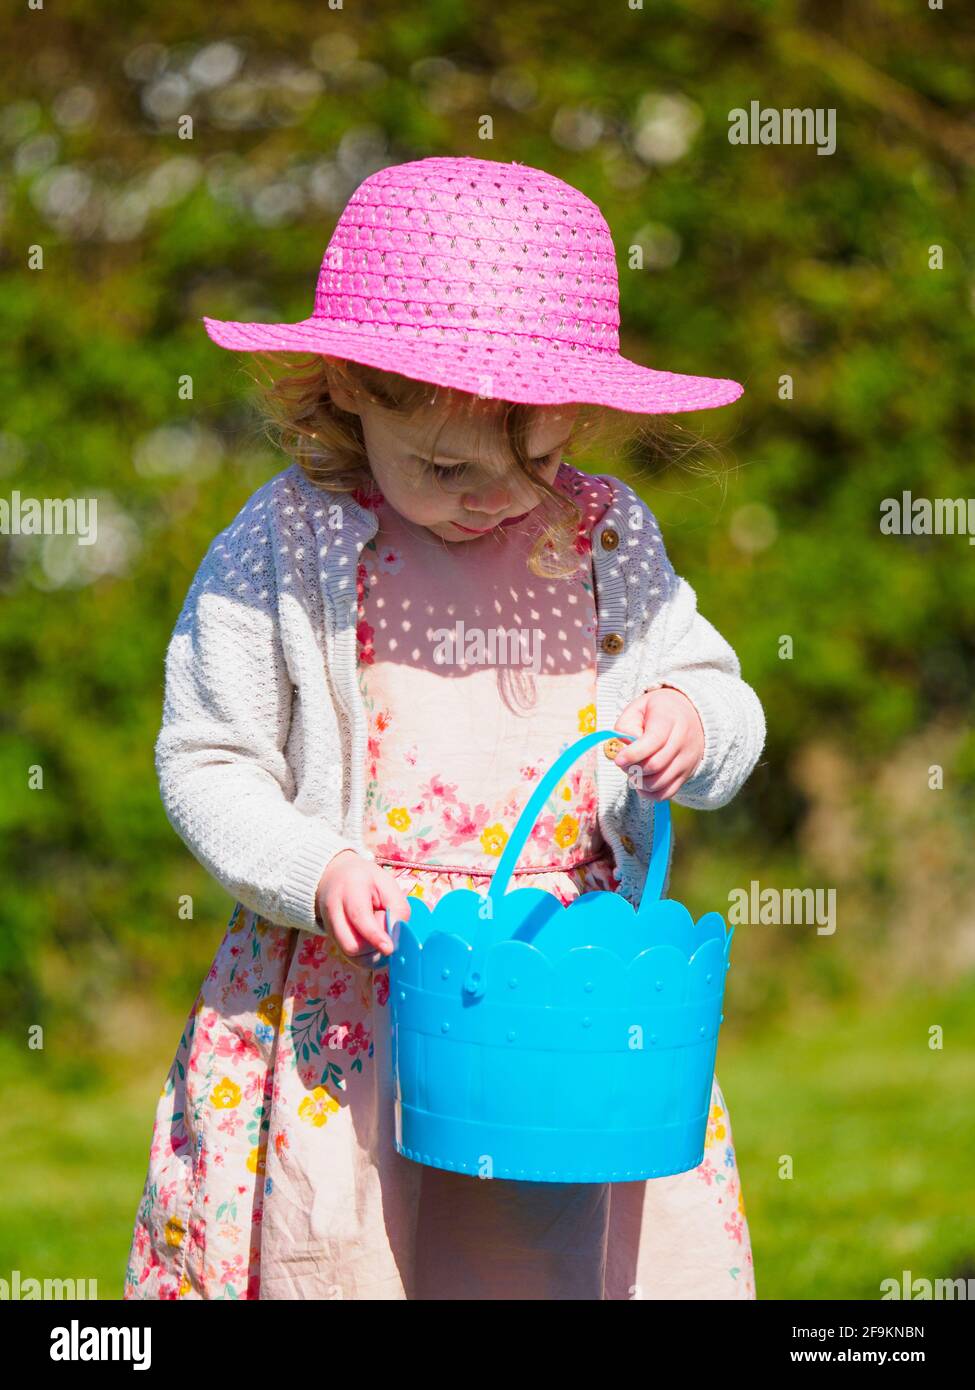 Little girl on an Easter egg hunt and putting them in a blue bucket, UK Stock Photo